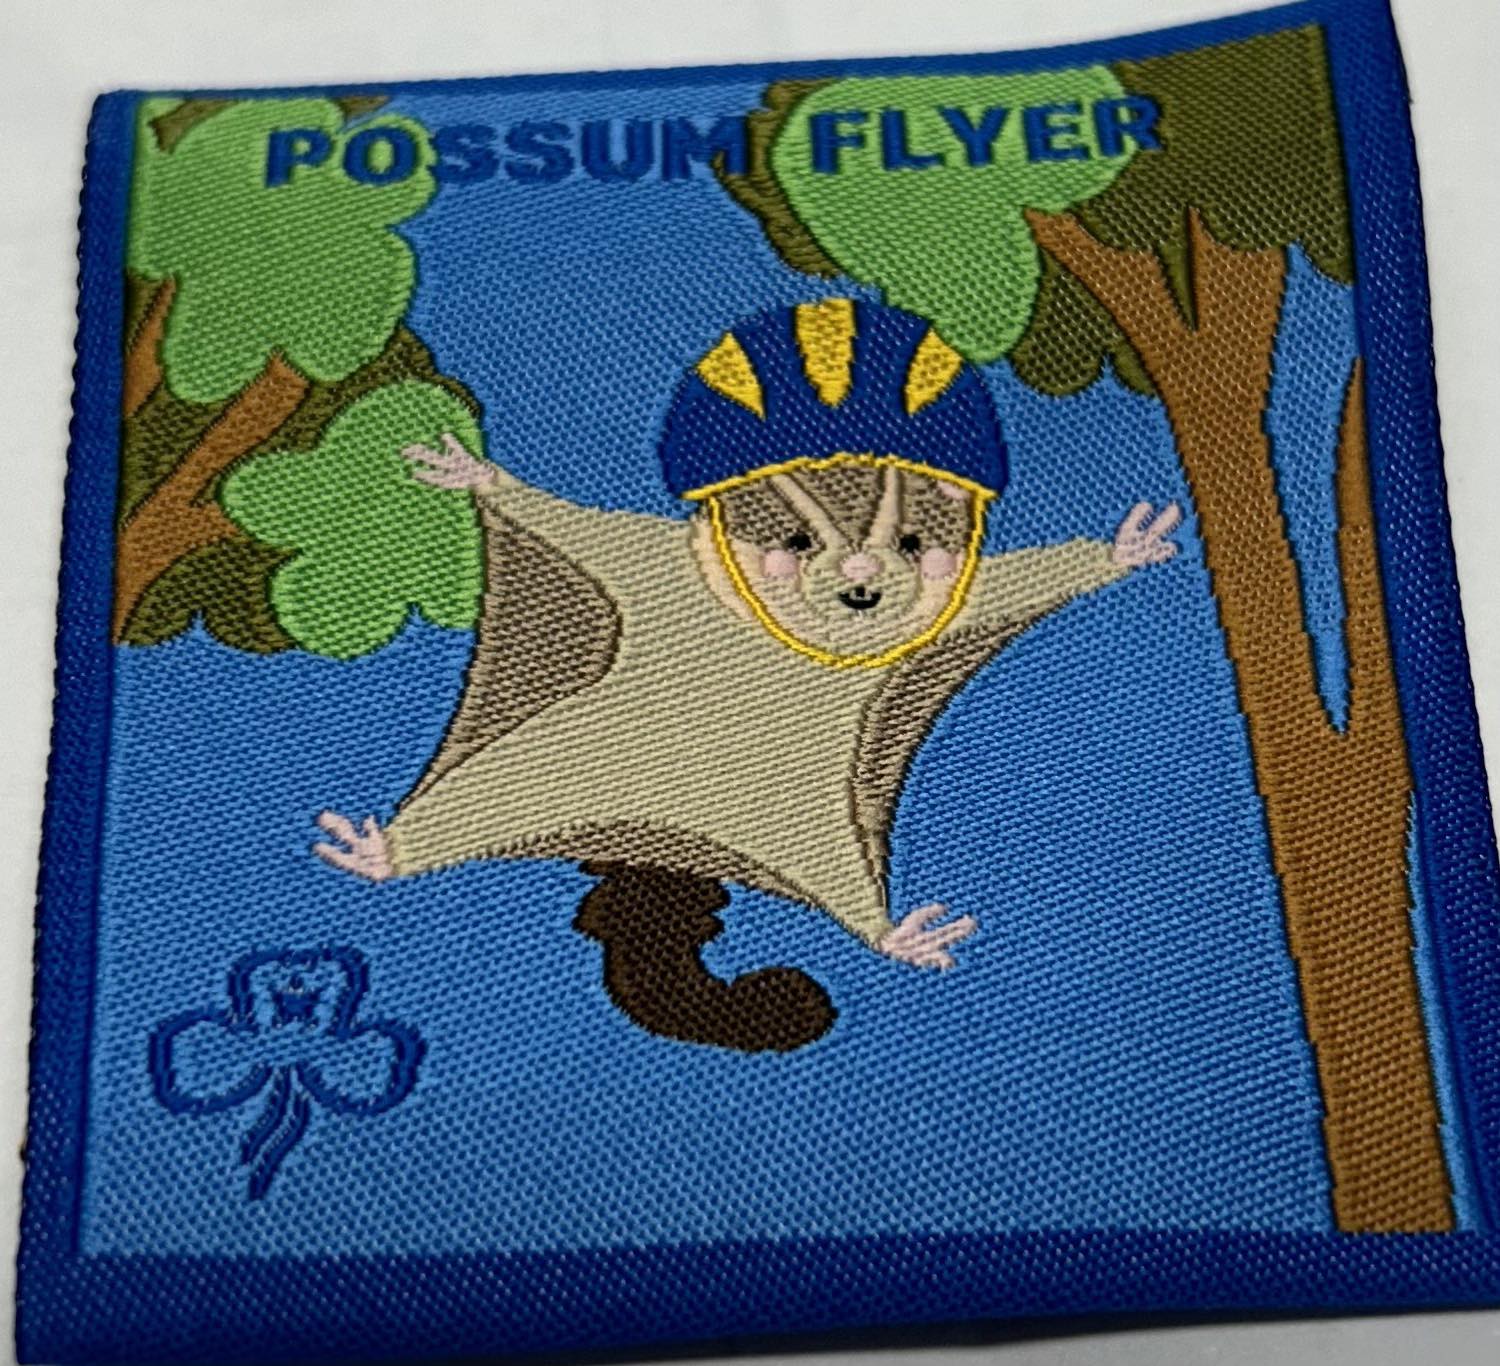 an unbound square badge with a blue background with a possum flying through the sky with a helmet on